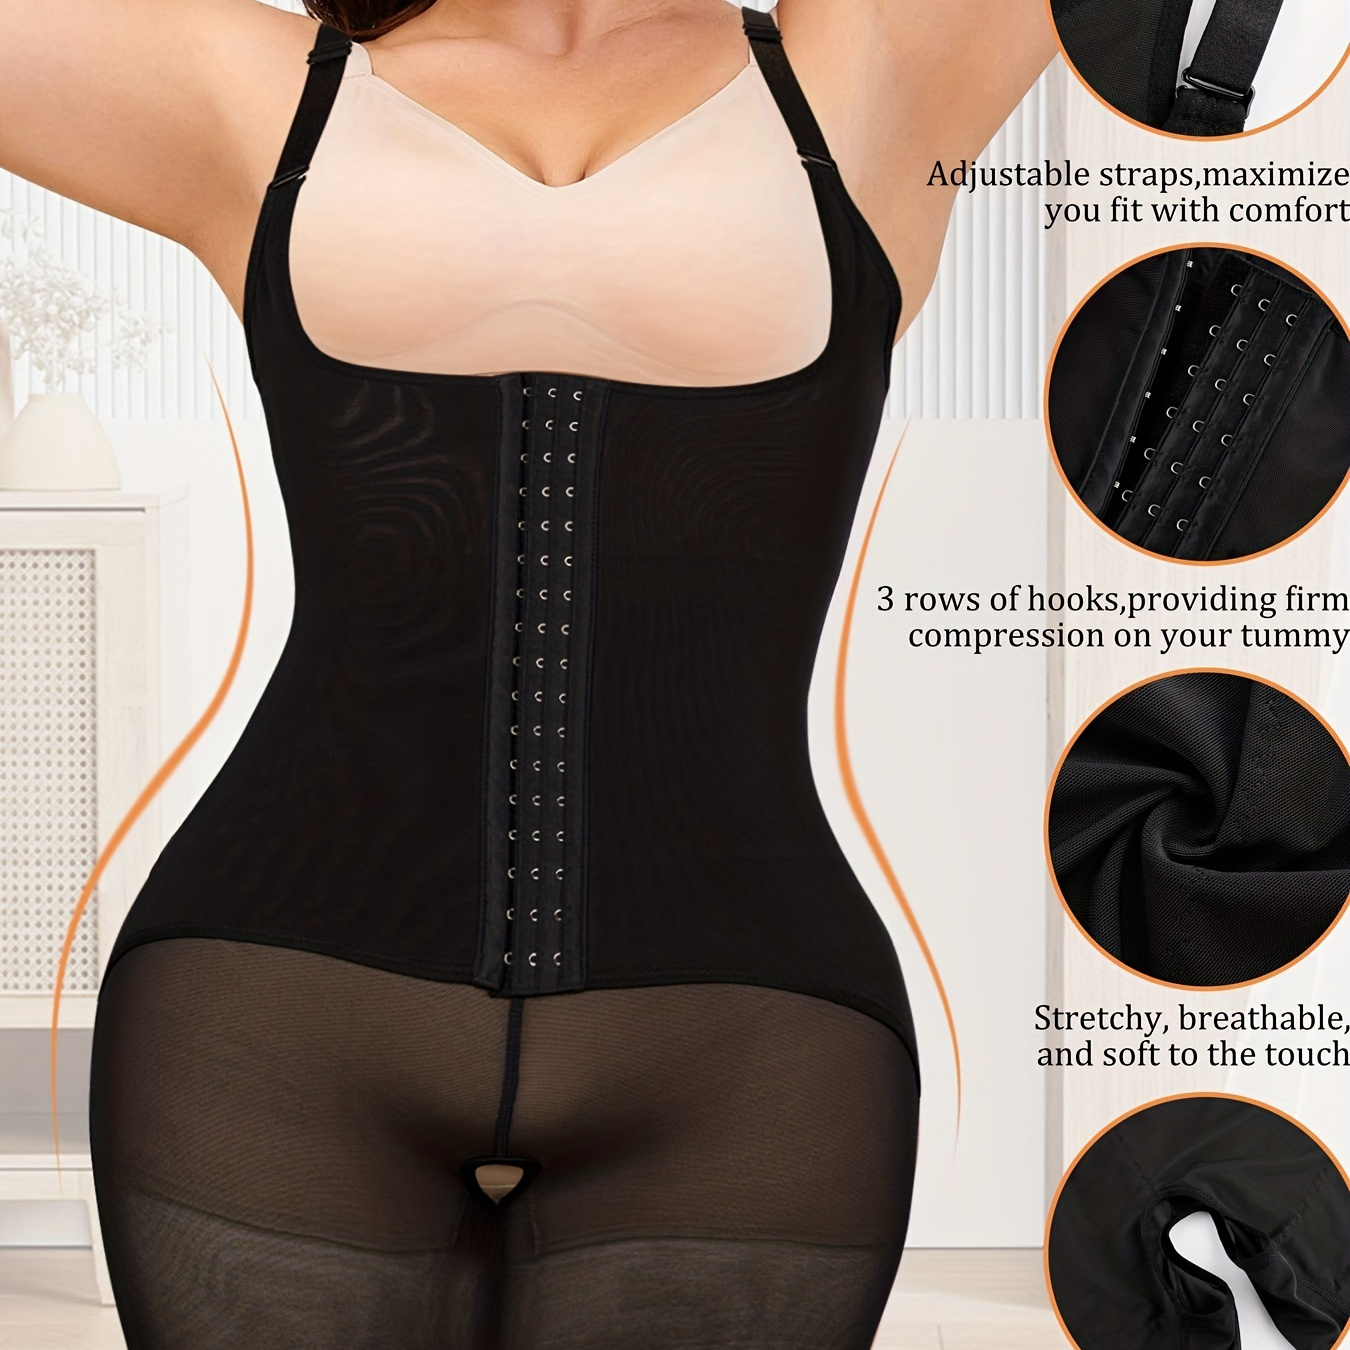 Women's Sexy Shapewear Bodysuit, Plus Size Lace Trim Open Bust Crotchless Tummy  Control Body Shaper, Check Out Today's Deals Now